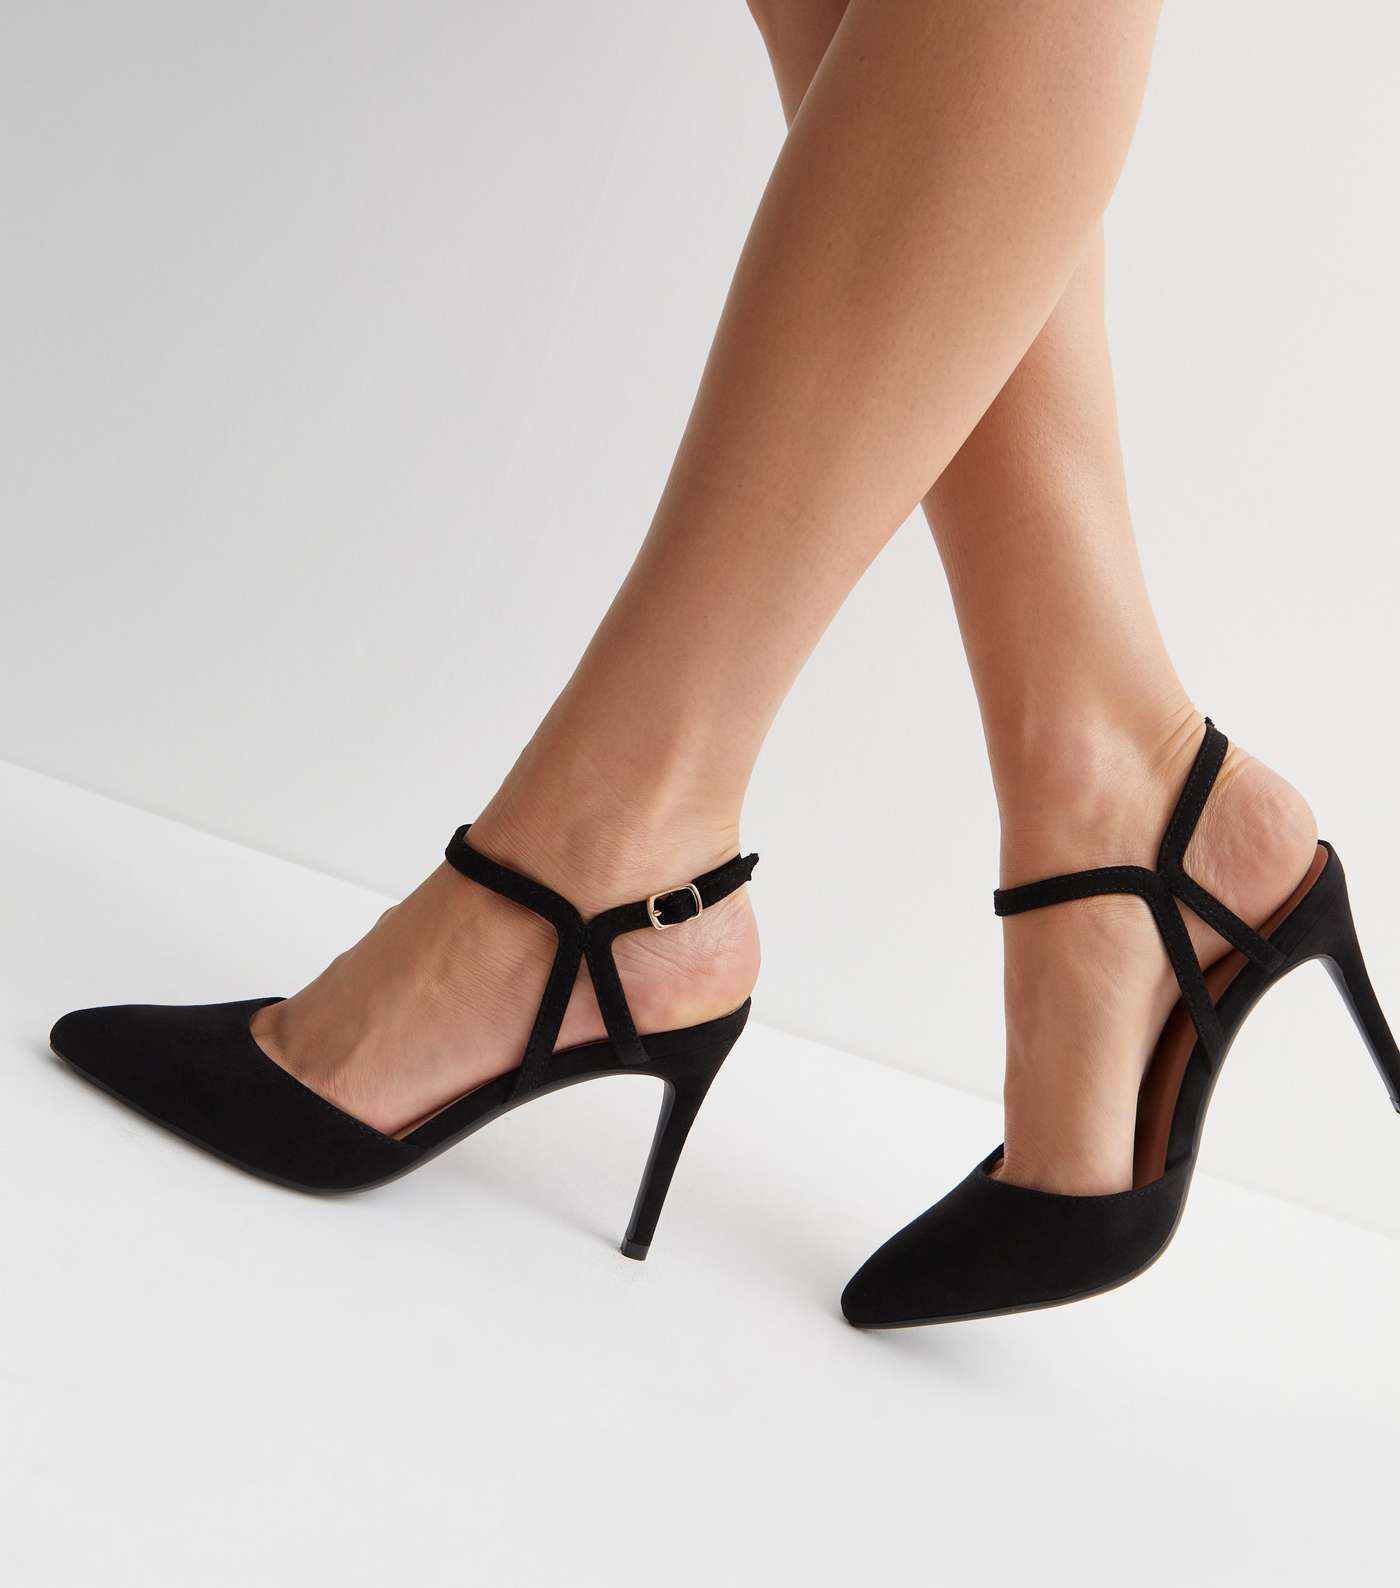 Black Suedette Pointed Toe Stiletto Heel Court Shoes Image 2